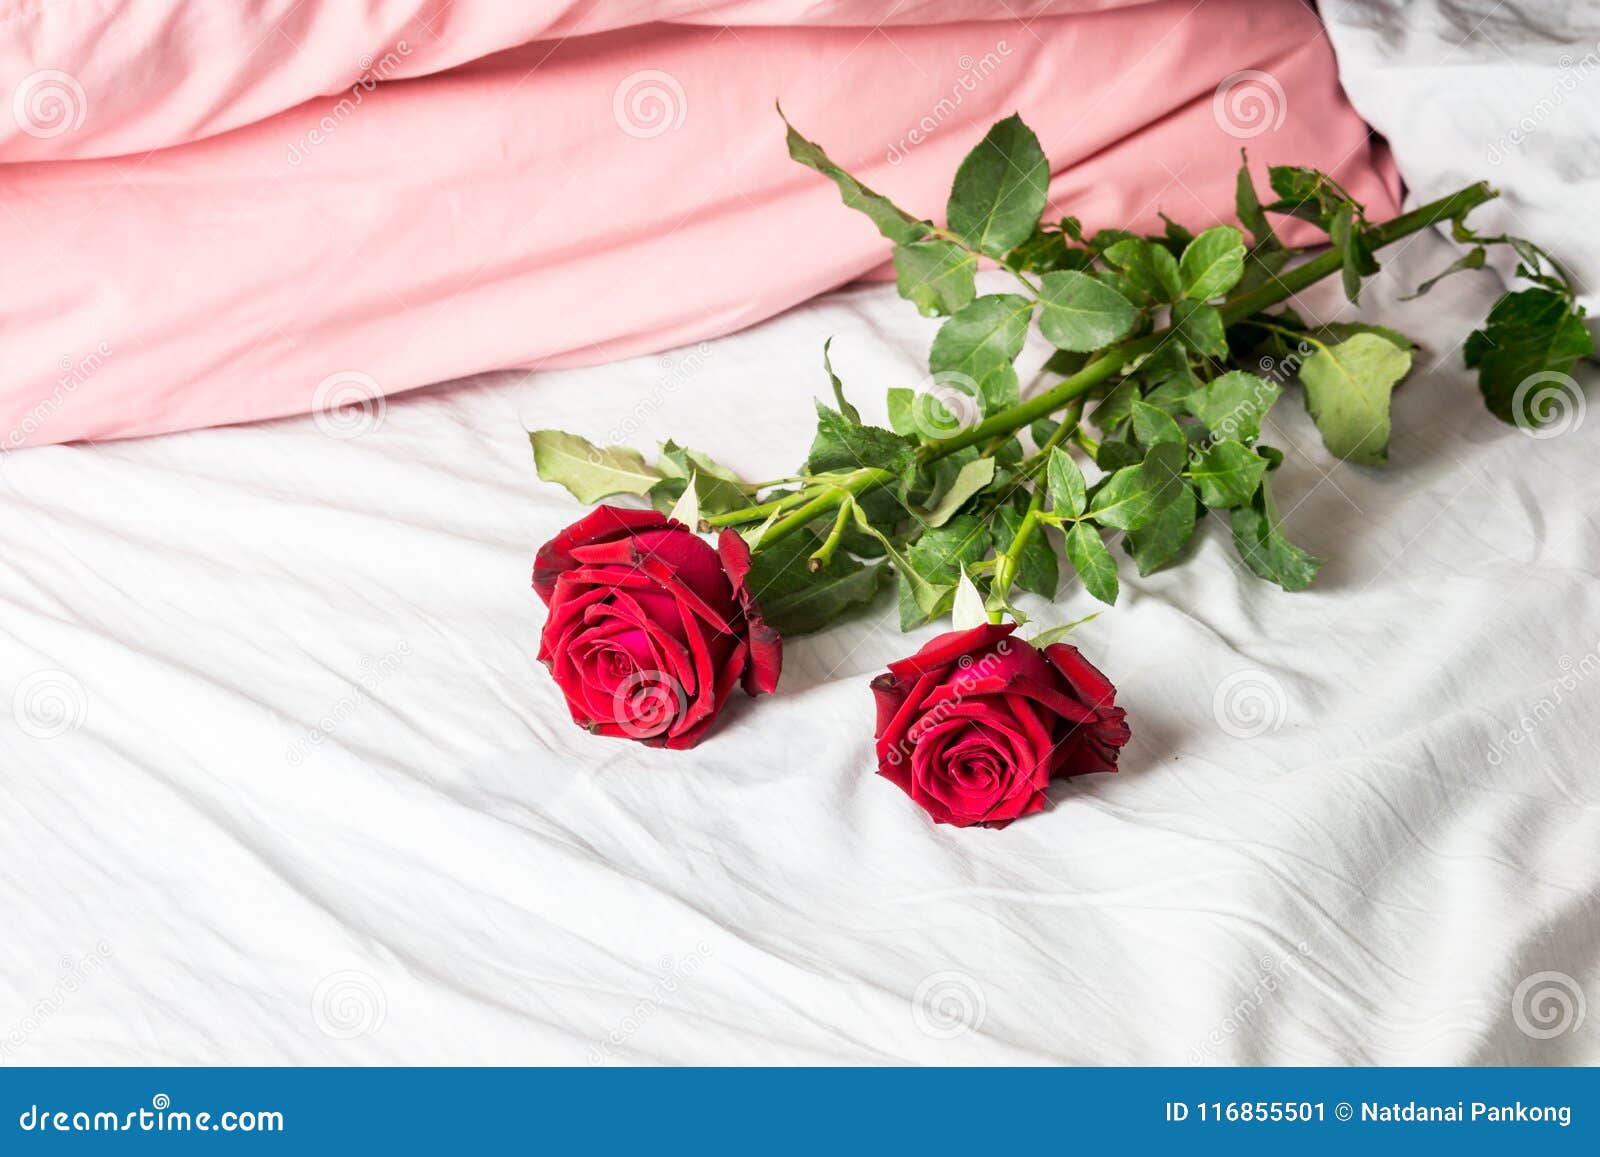 Romantic Getaway with Red Roses on Bed Stock Image - Image of peace ...